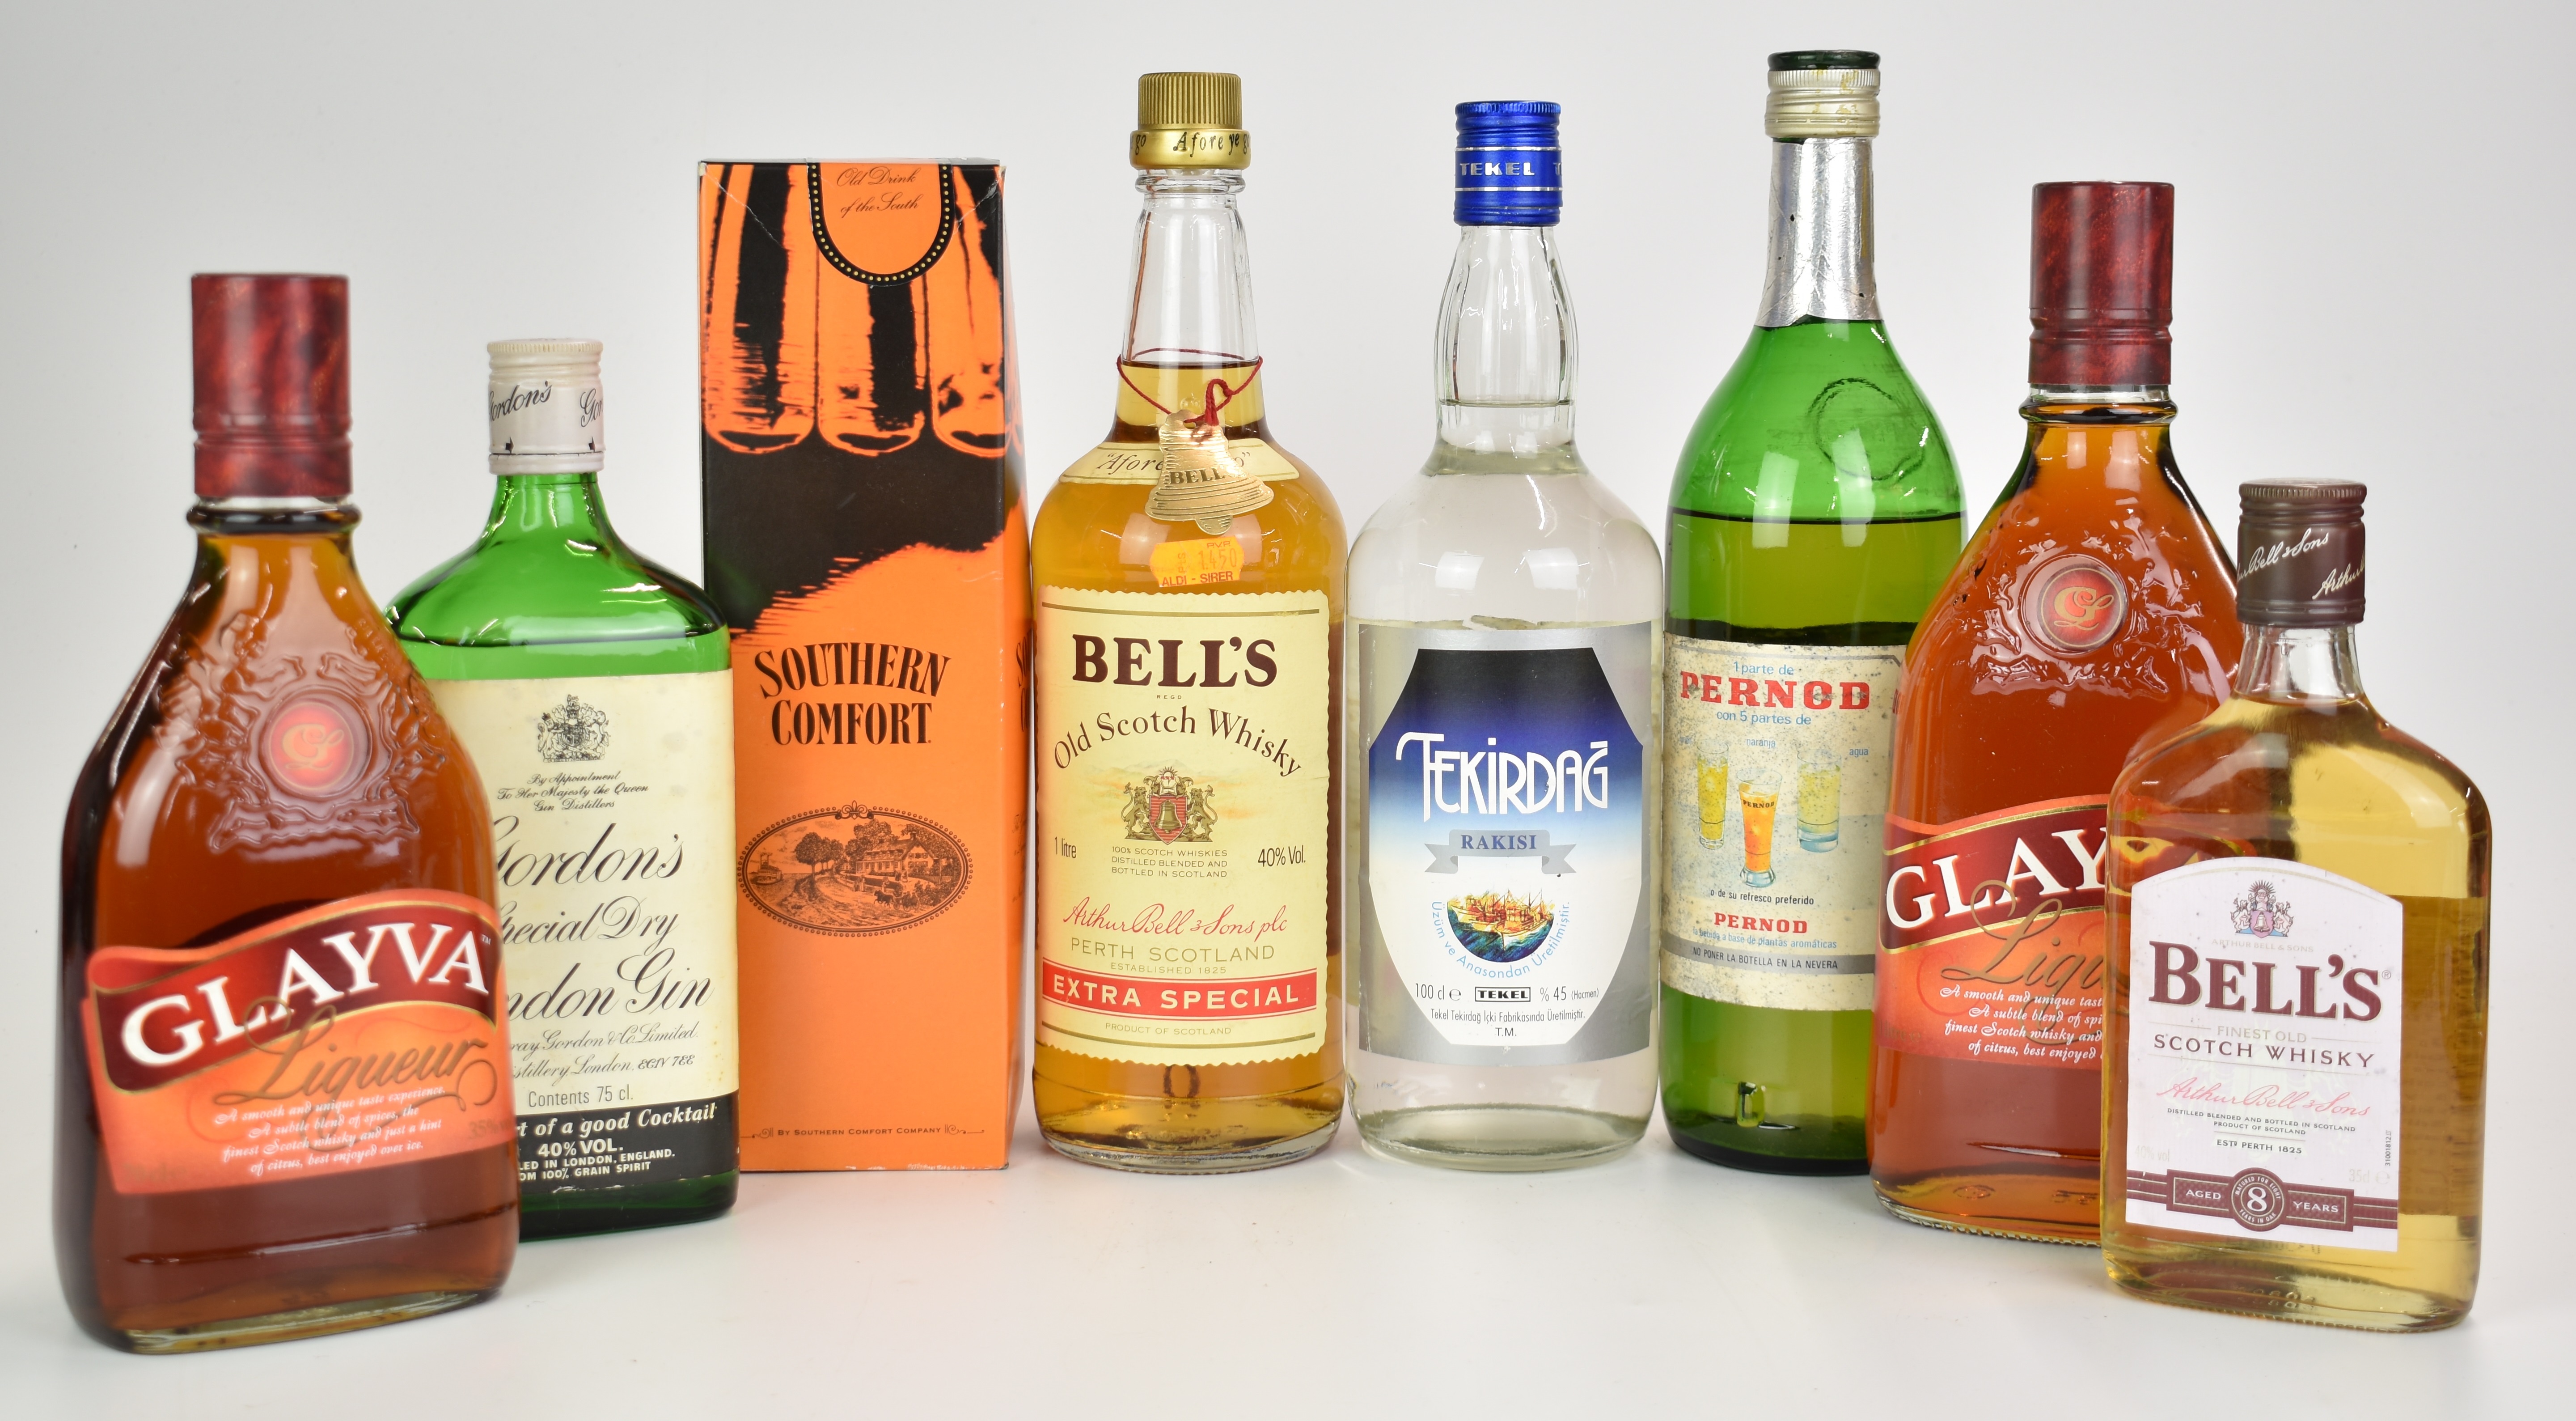 Spirits and liqueurs including Gordon's Gin 75cl, 40% vol, Bell's Whisky, 1ltr, 40% vol, boxed